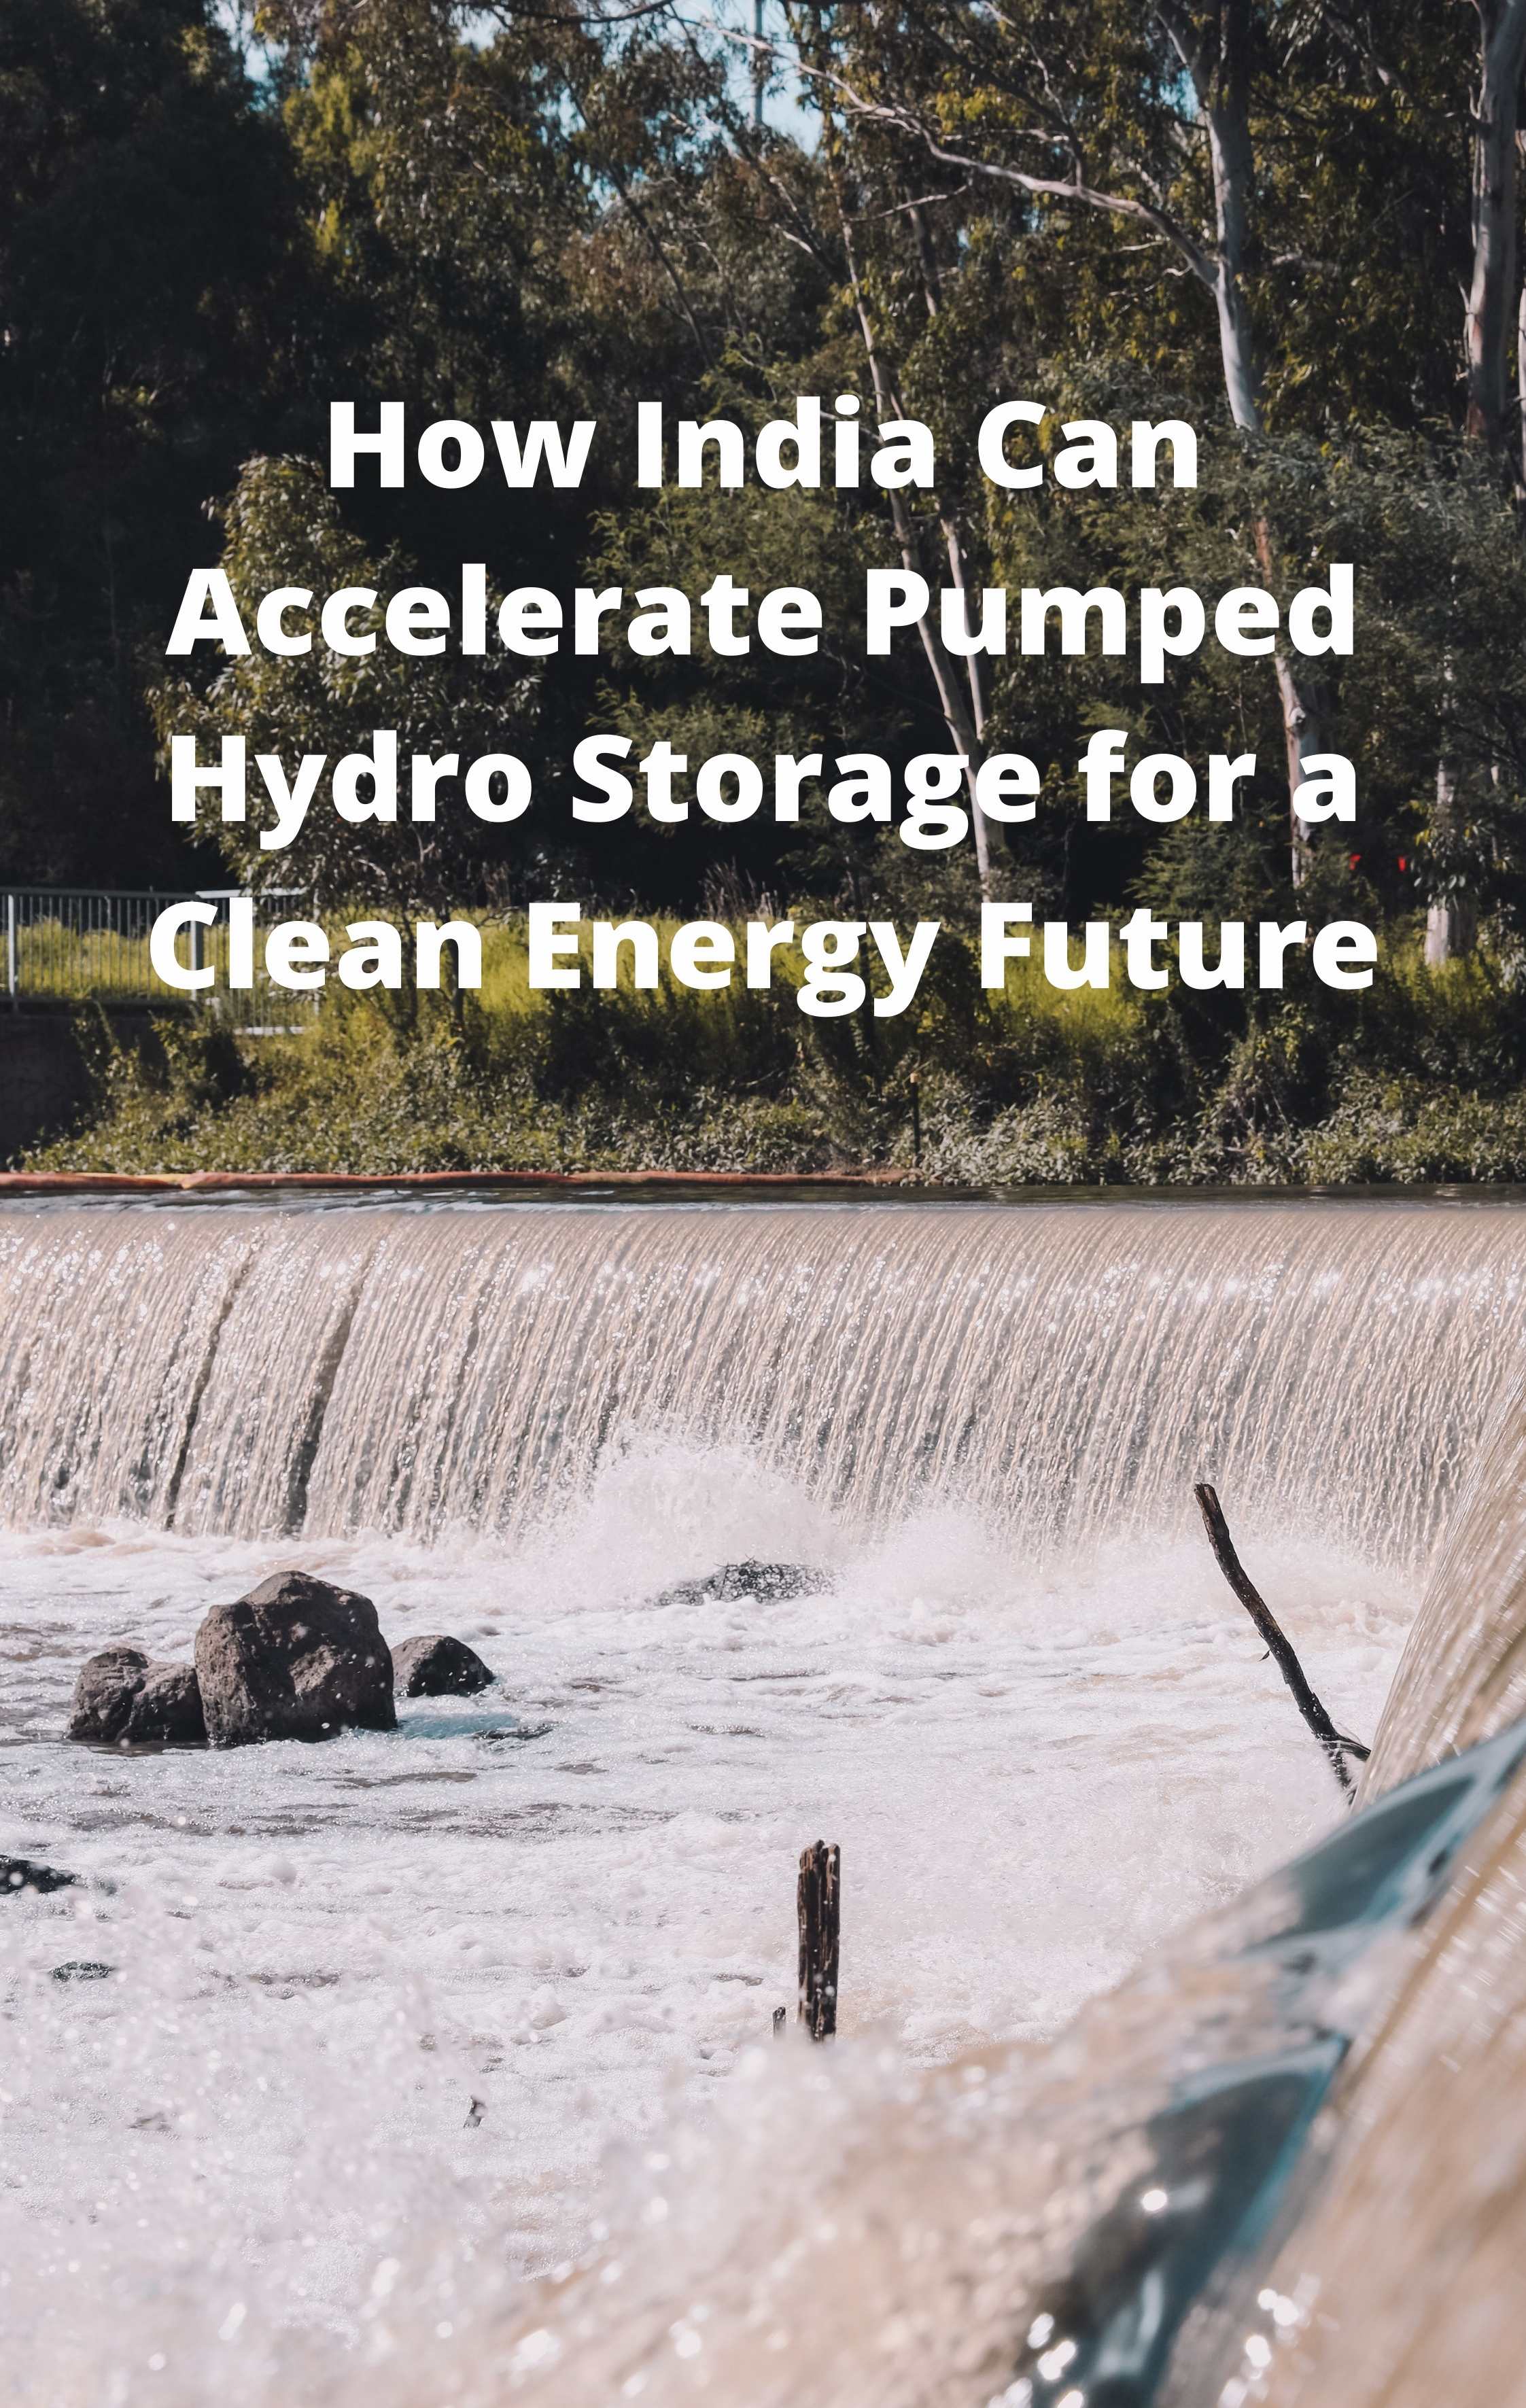 How India Can Accelerate Pumped Hydro Storage for a Clean Energy Future